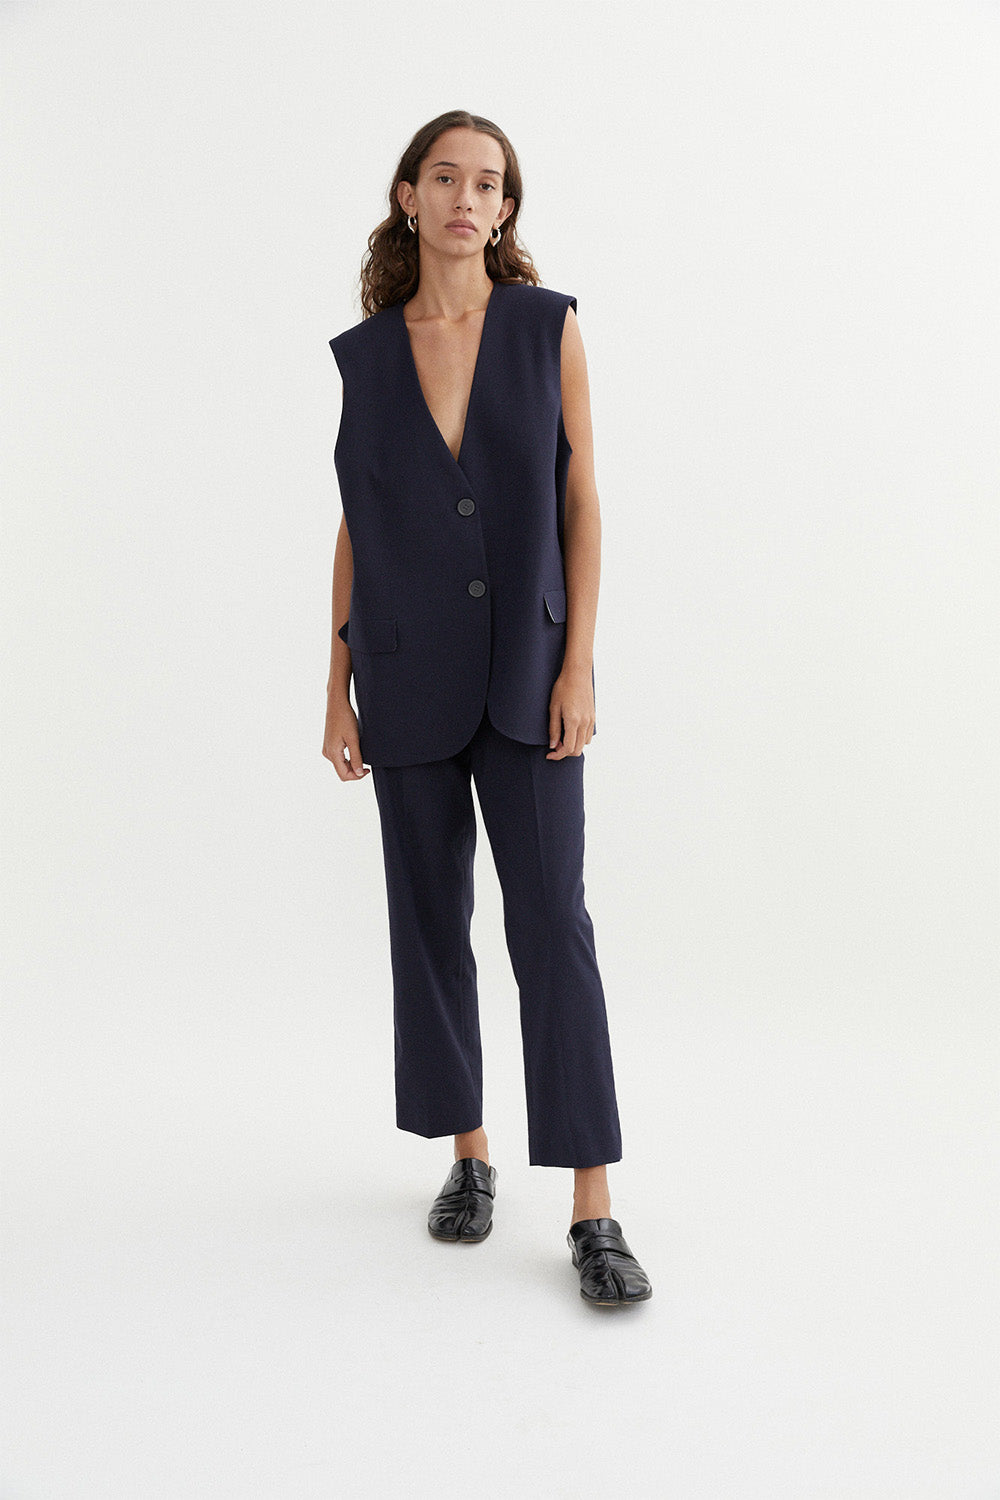 Halston Pants in Navy by BLANCA